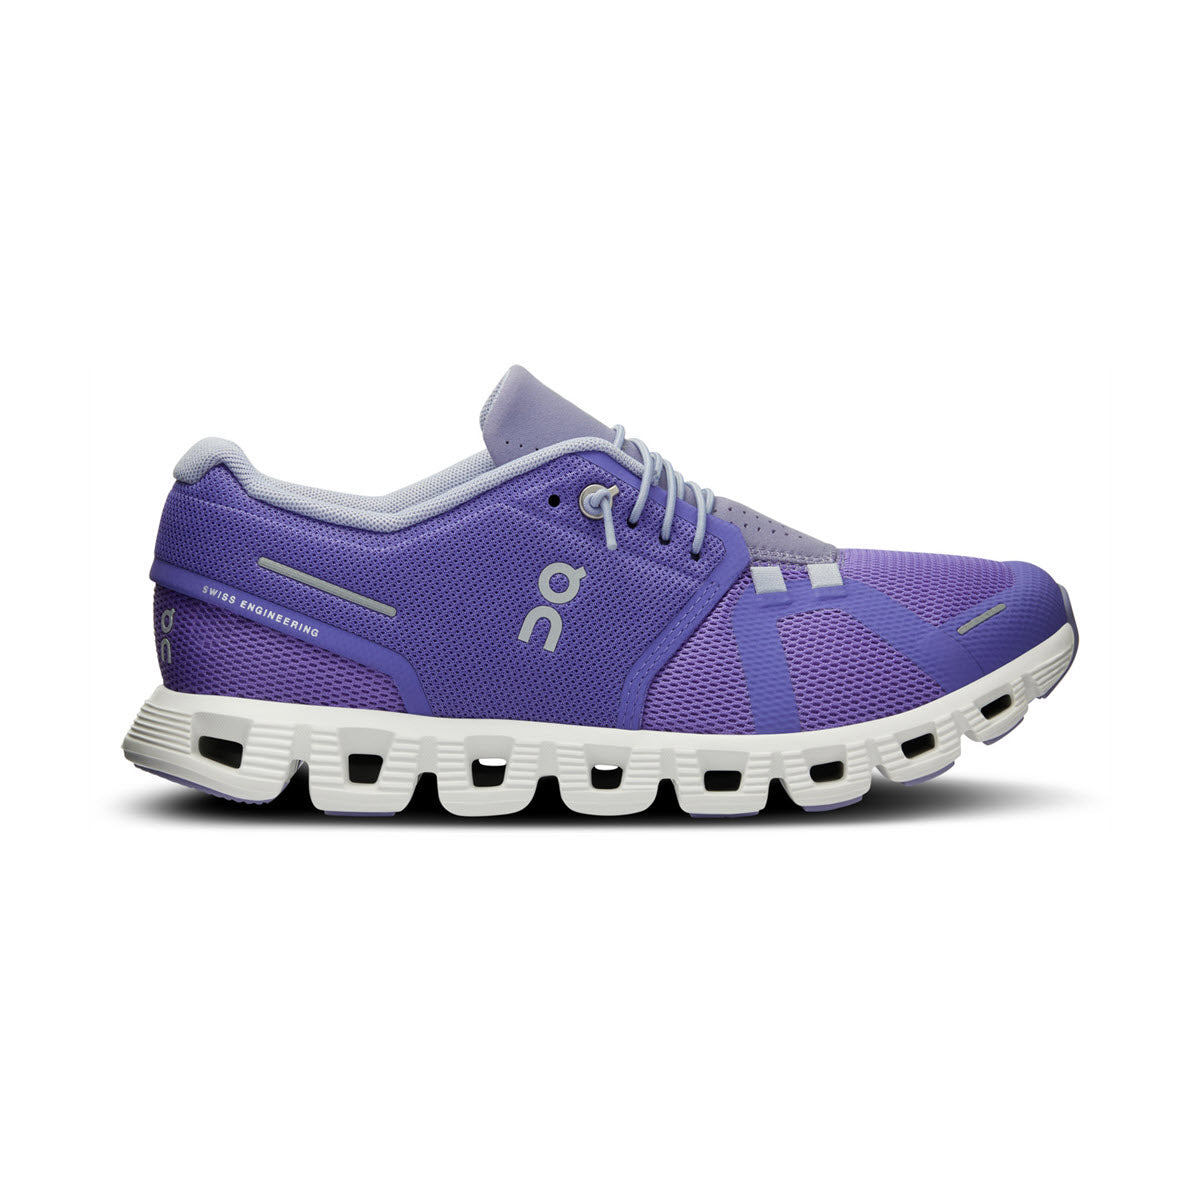 A single blueberry-colored ON Running Cloud 5 athletic shoe with white laces and an improved fit, featuring a unique segmented sole, isolated on a white background.